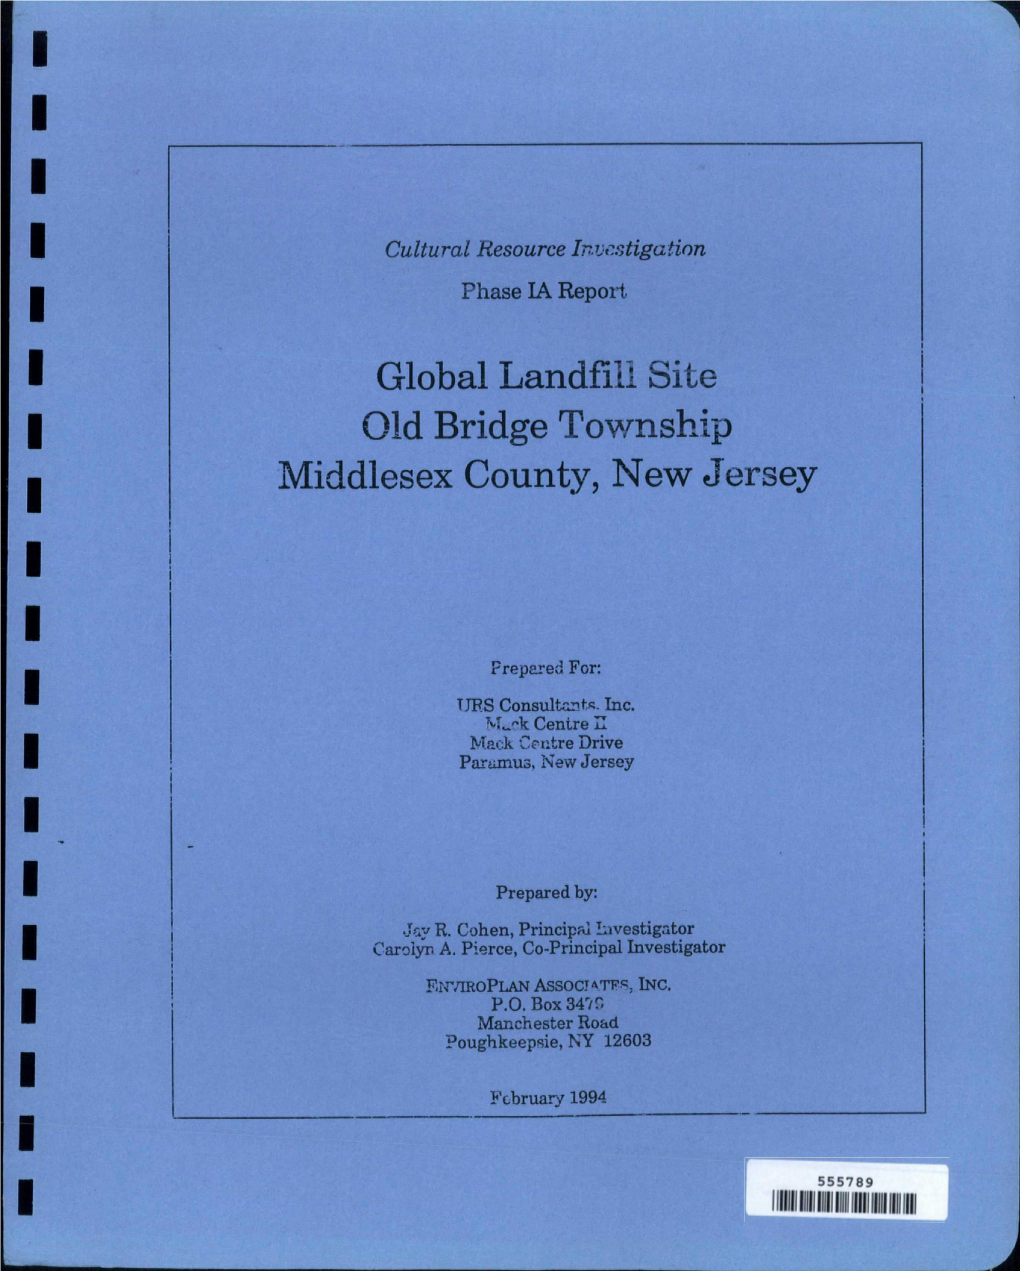 Global Landfill Site- Old Bridge Township Middlesex County, New Jersey